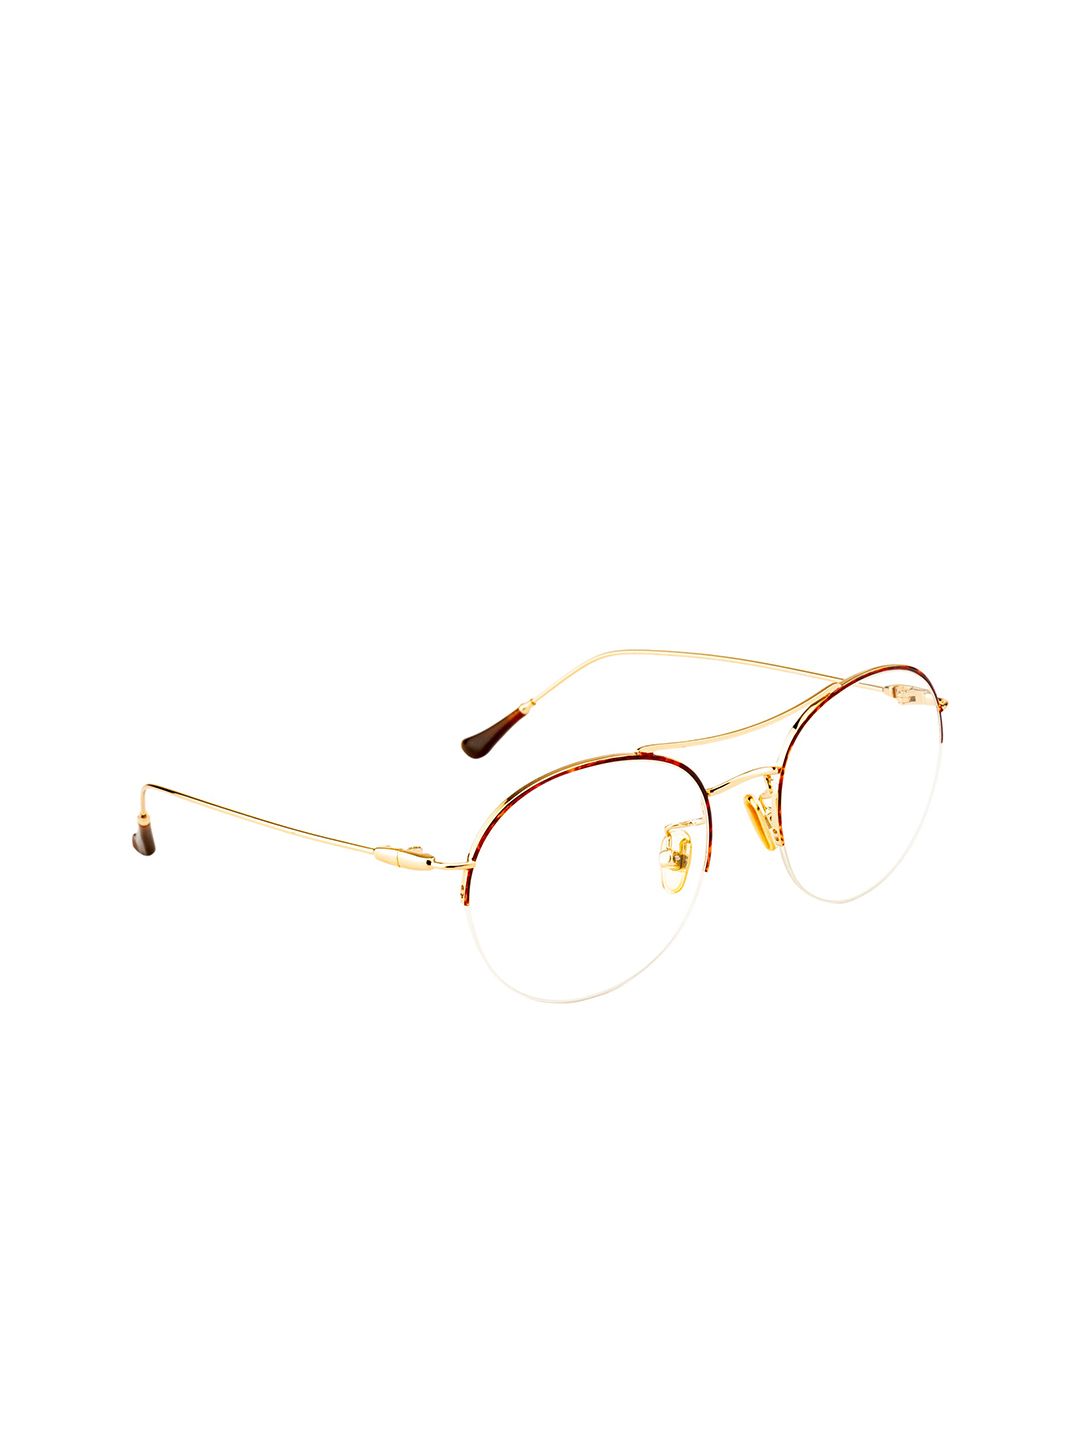 Ted Smith Unisex Brown & Gold-Toned Half Rim Aviator Frames Price in India